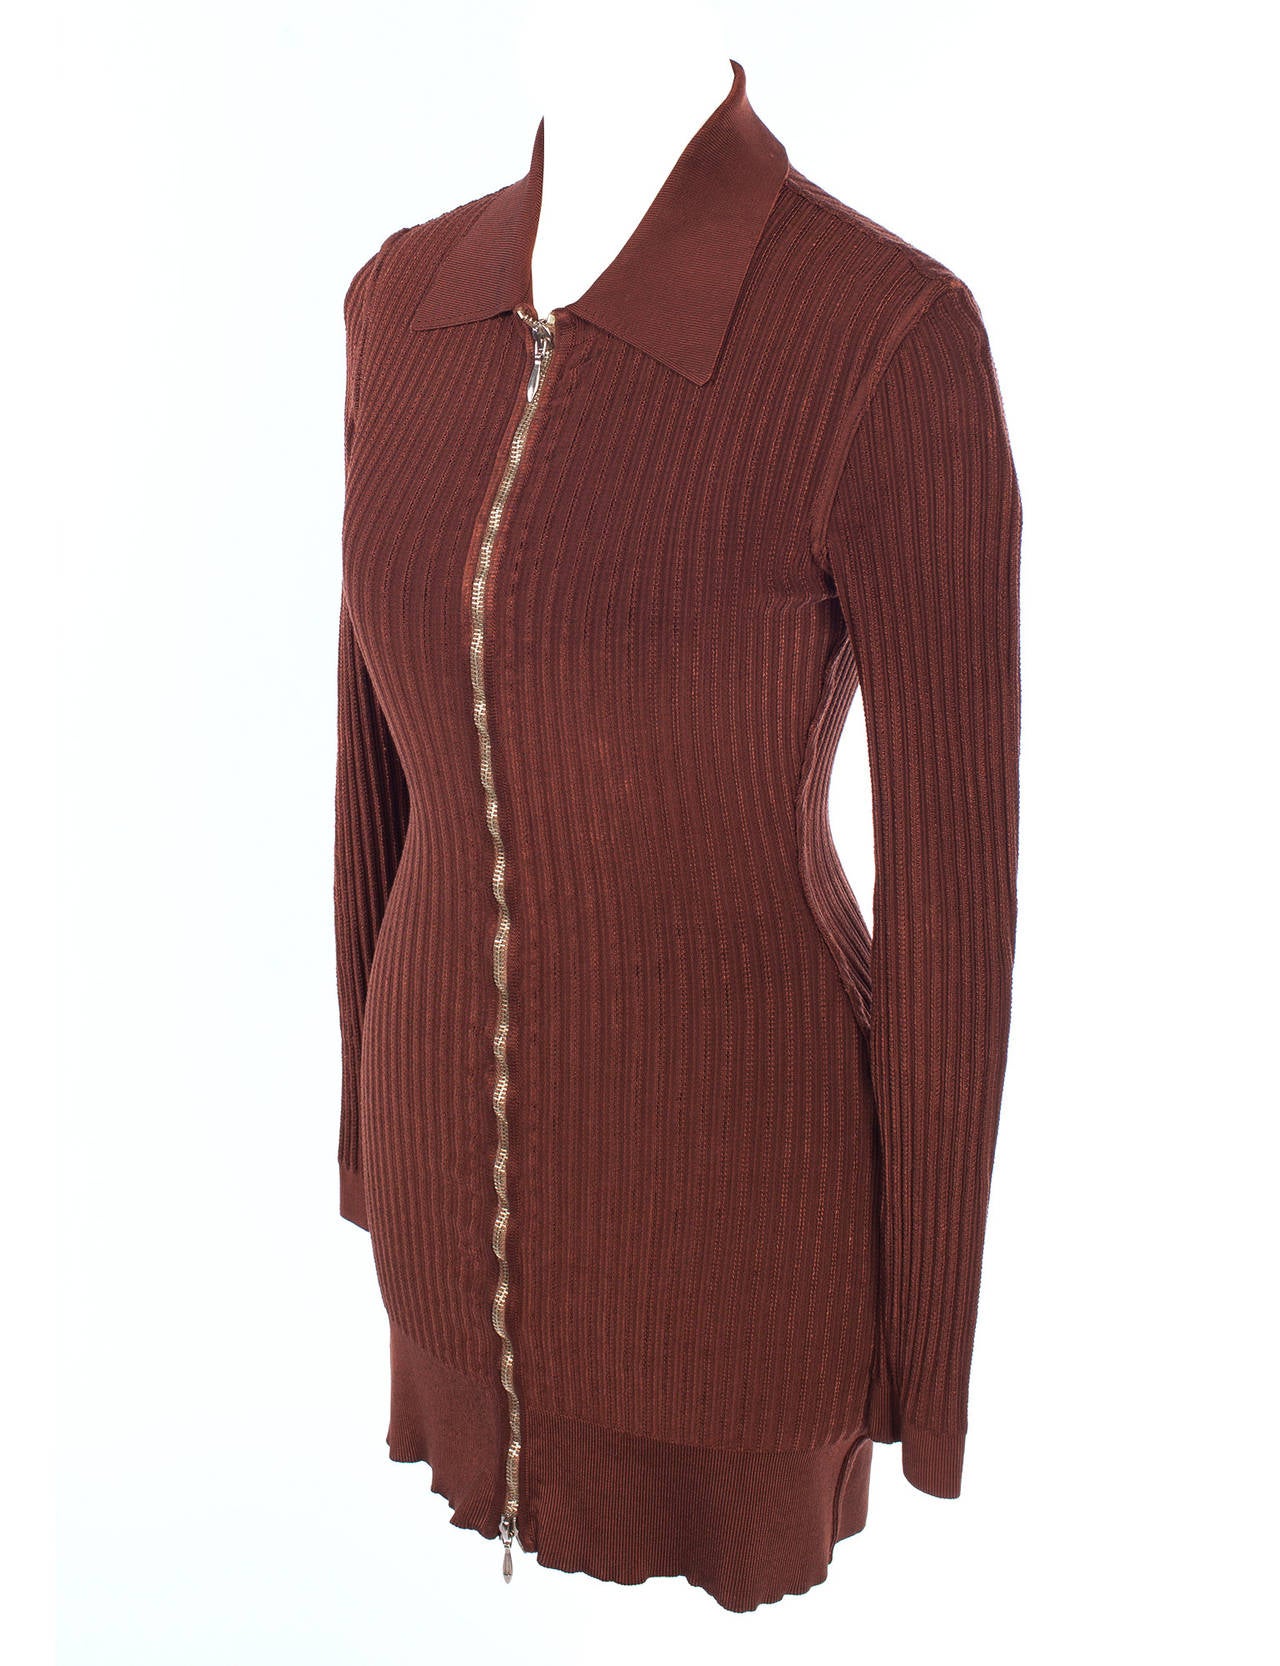 Azzedine Alaia knitted dress in brown pointelle knit. Dress is body con style with long sleeves, silver zipper, knitted shirt collar, pure 90's Alaia design.